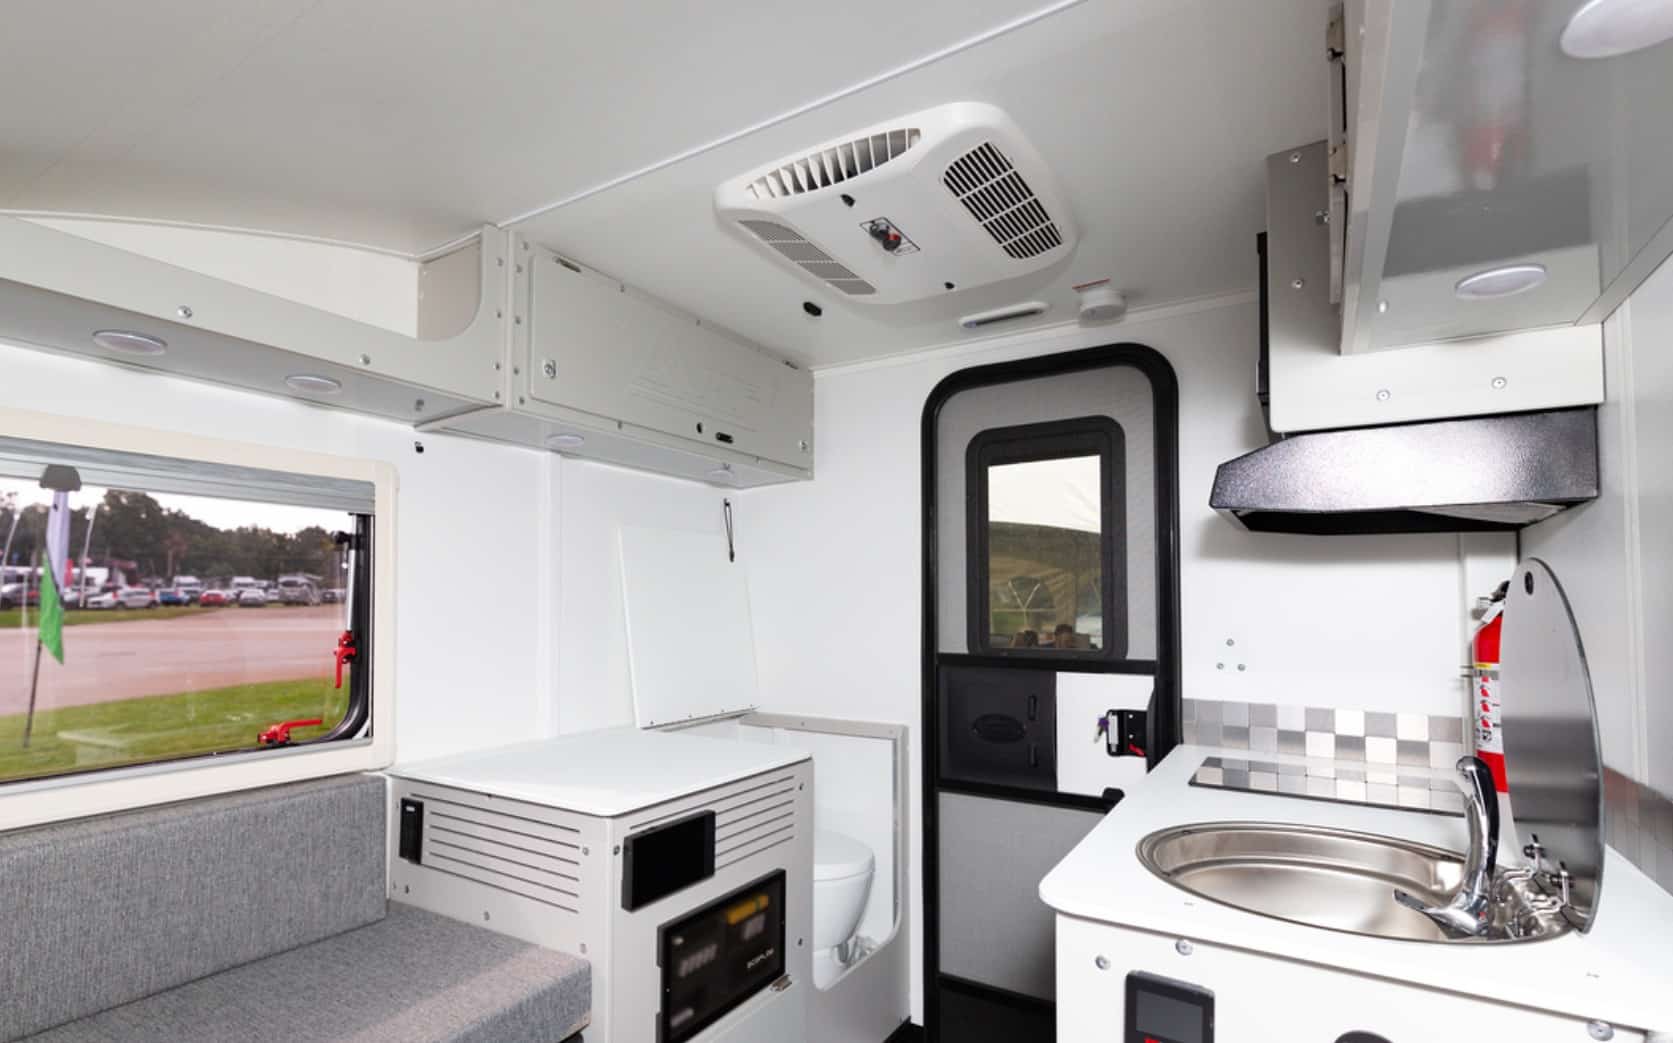 Interior view of a compact camper van with kitchenette and seating area.